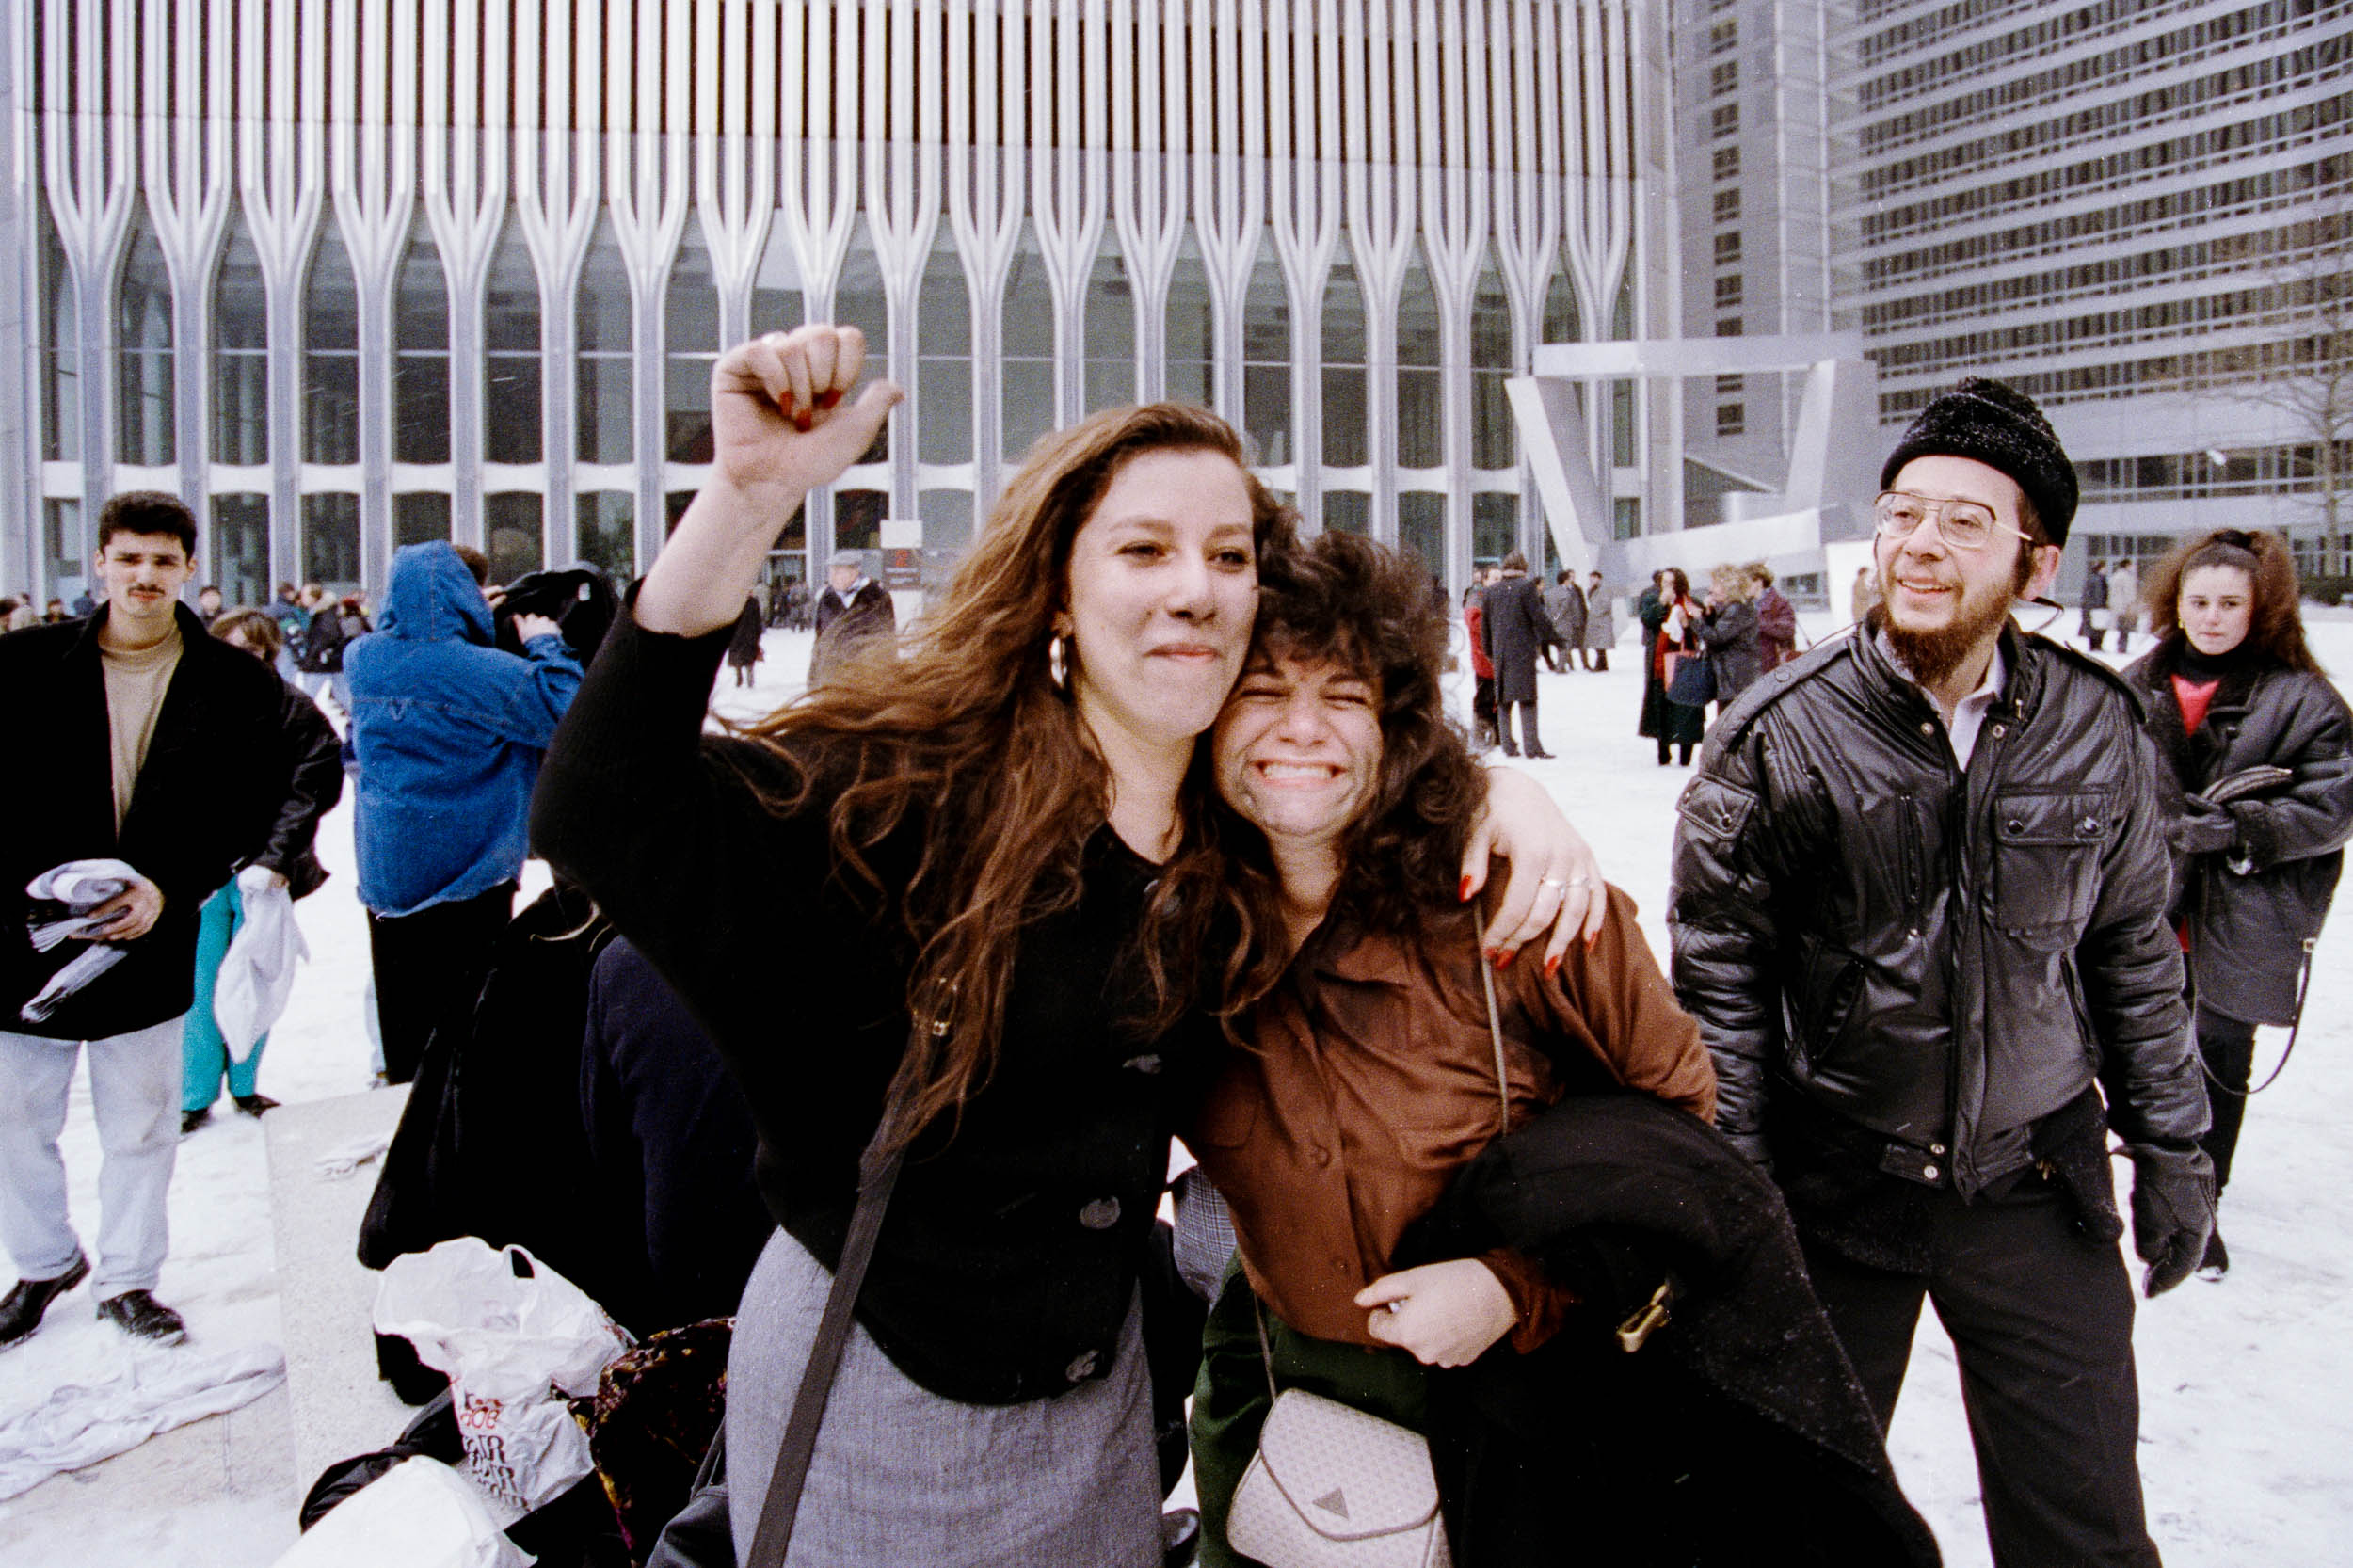 Office workers reuniting with joy  in the Plaza of the World Trade Center, NY, 1993